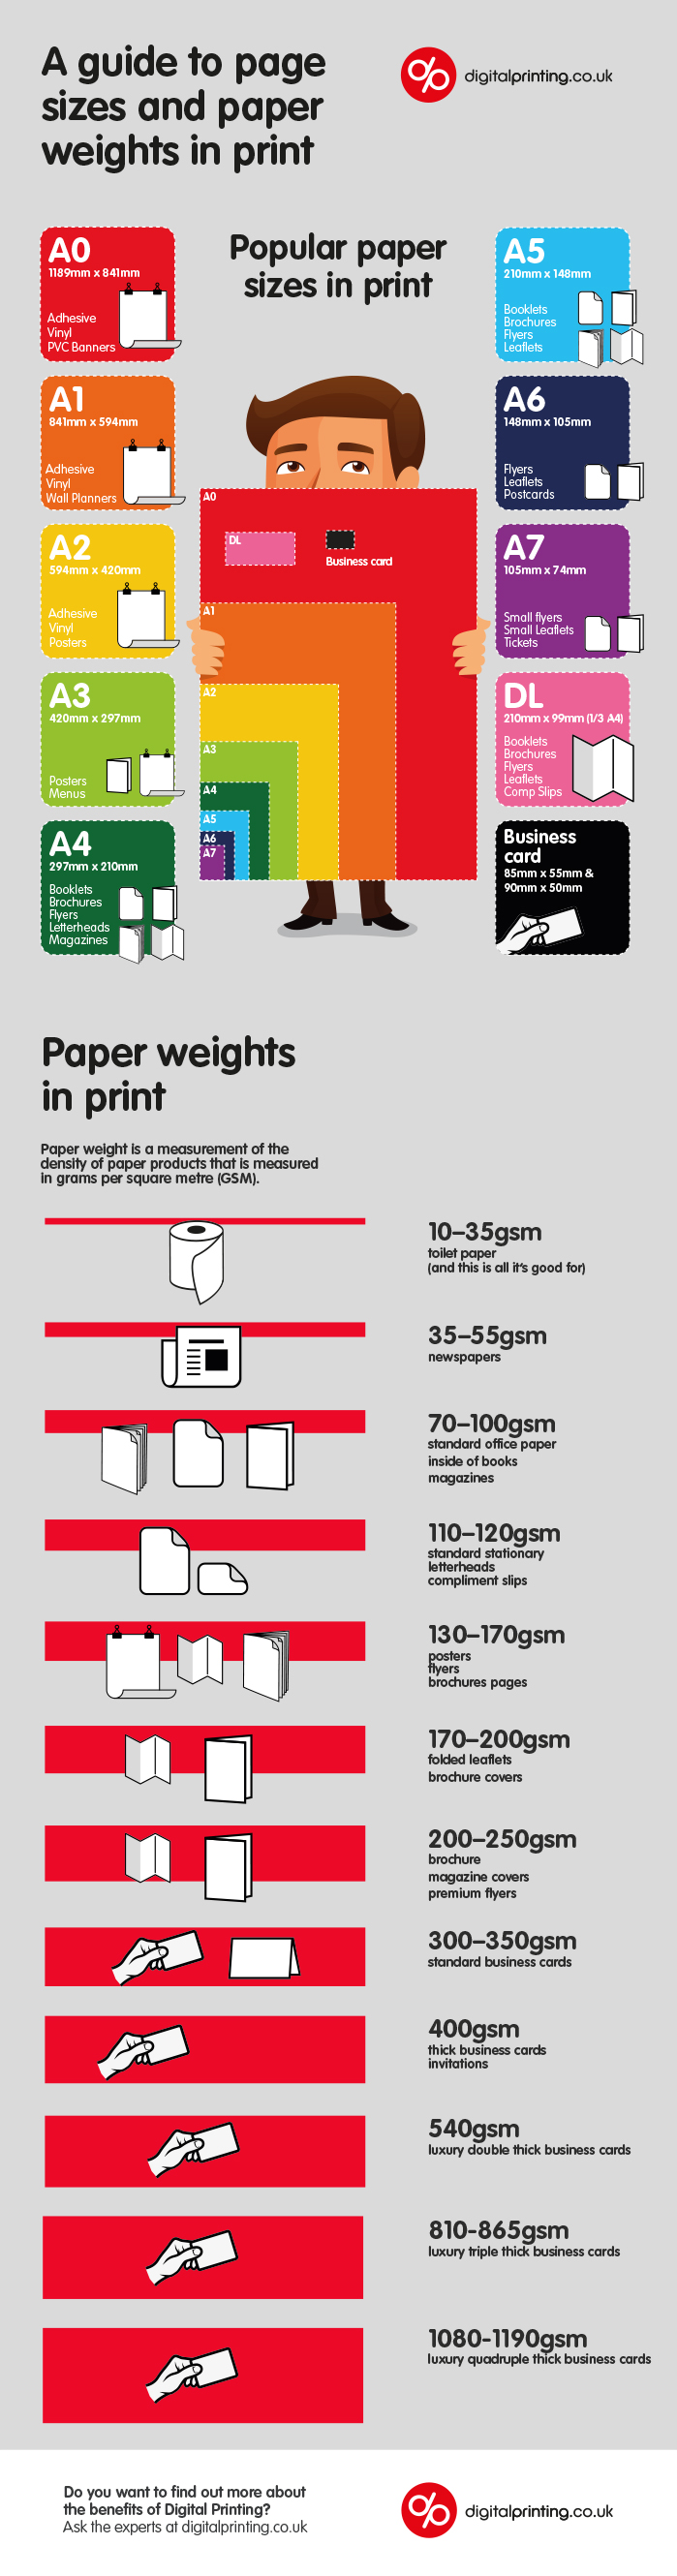 All you need to know about Page size and Paper weight in print